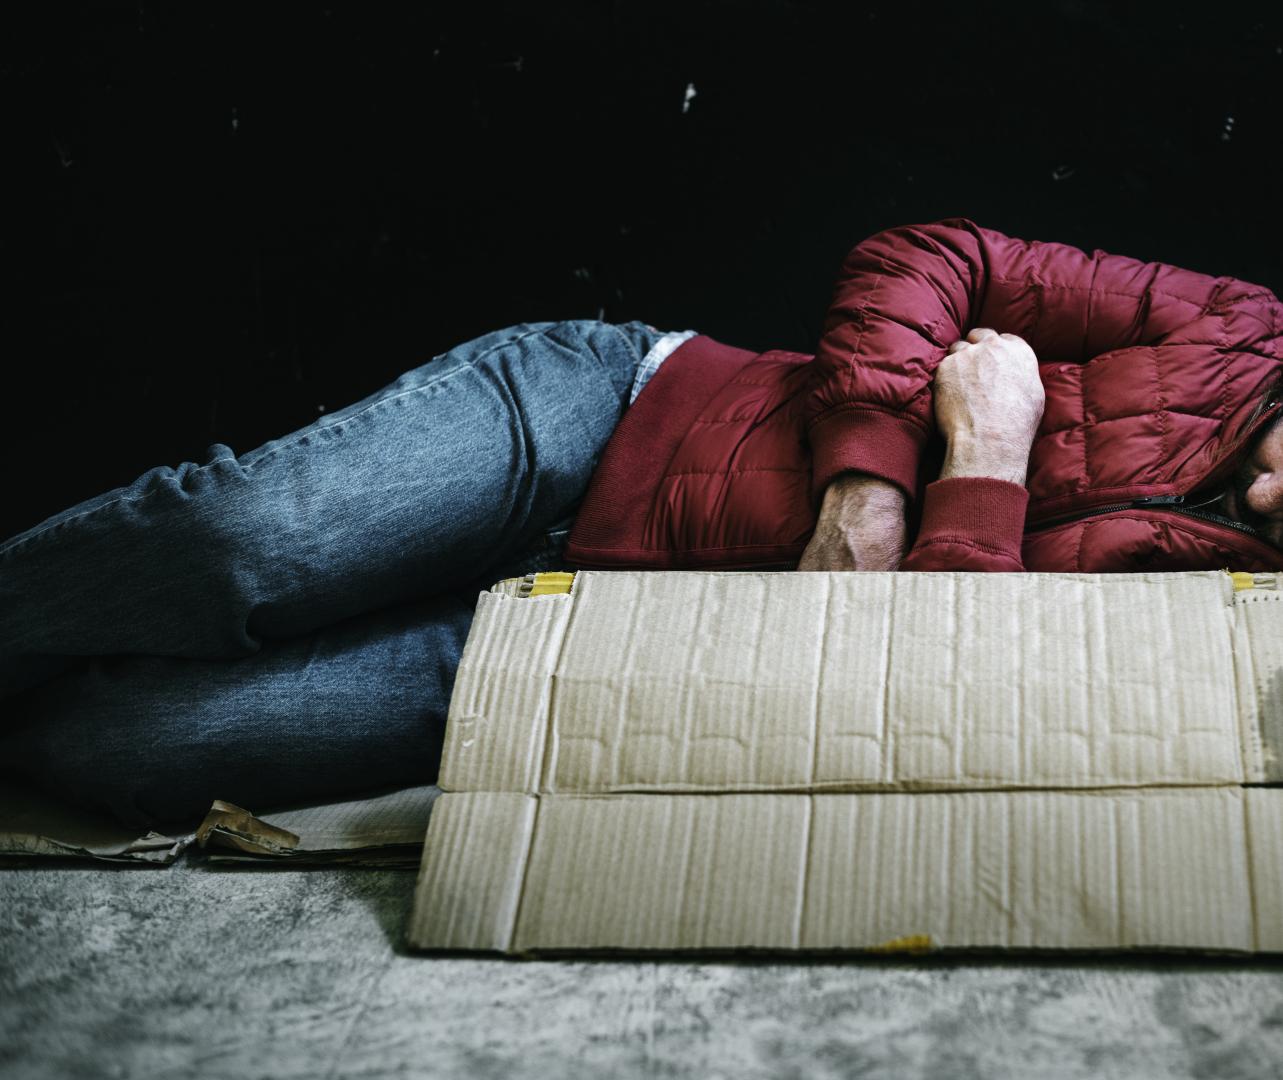 homeless white man wearing blue jeans and a read puffer jacket sleeping out in the cold (rawpixel.com)